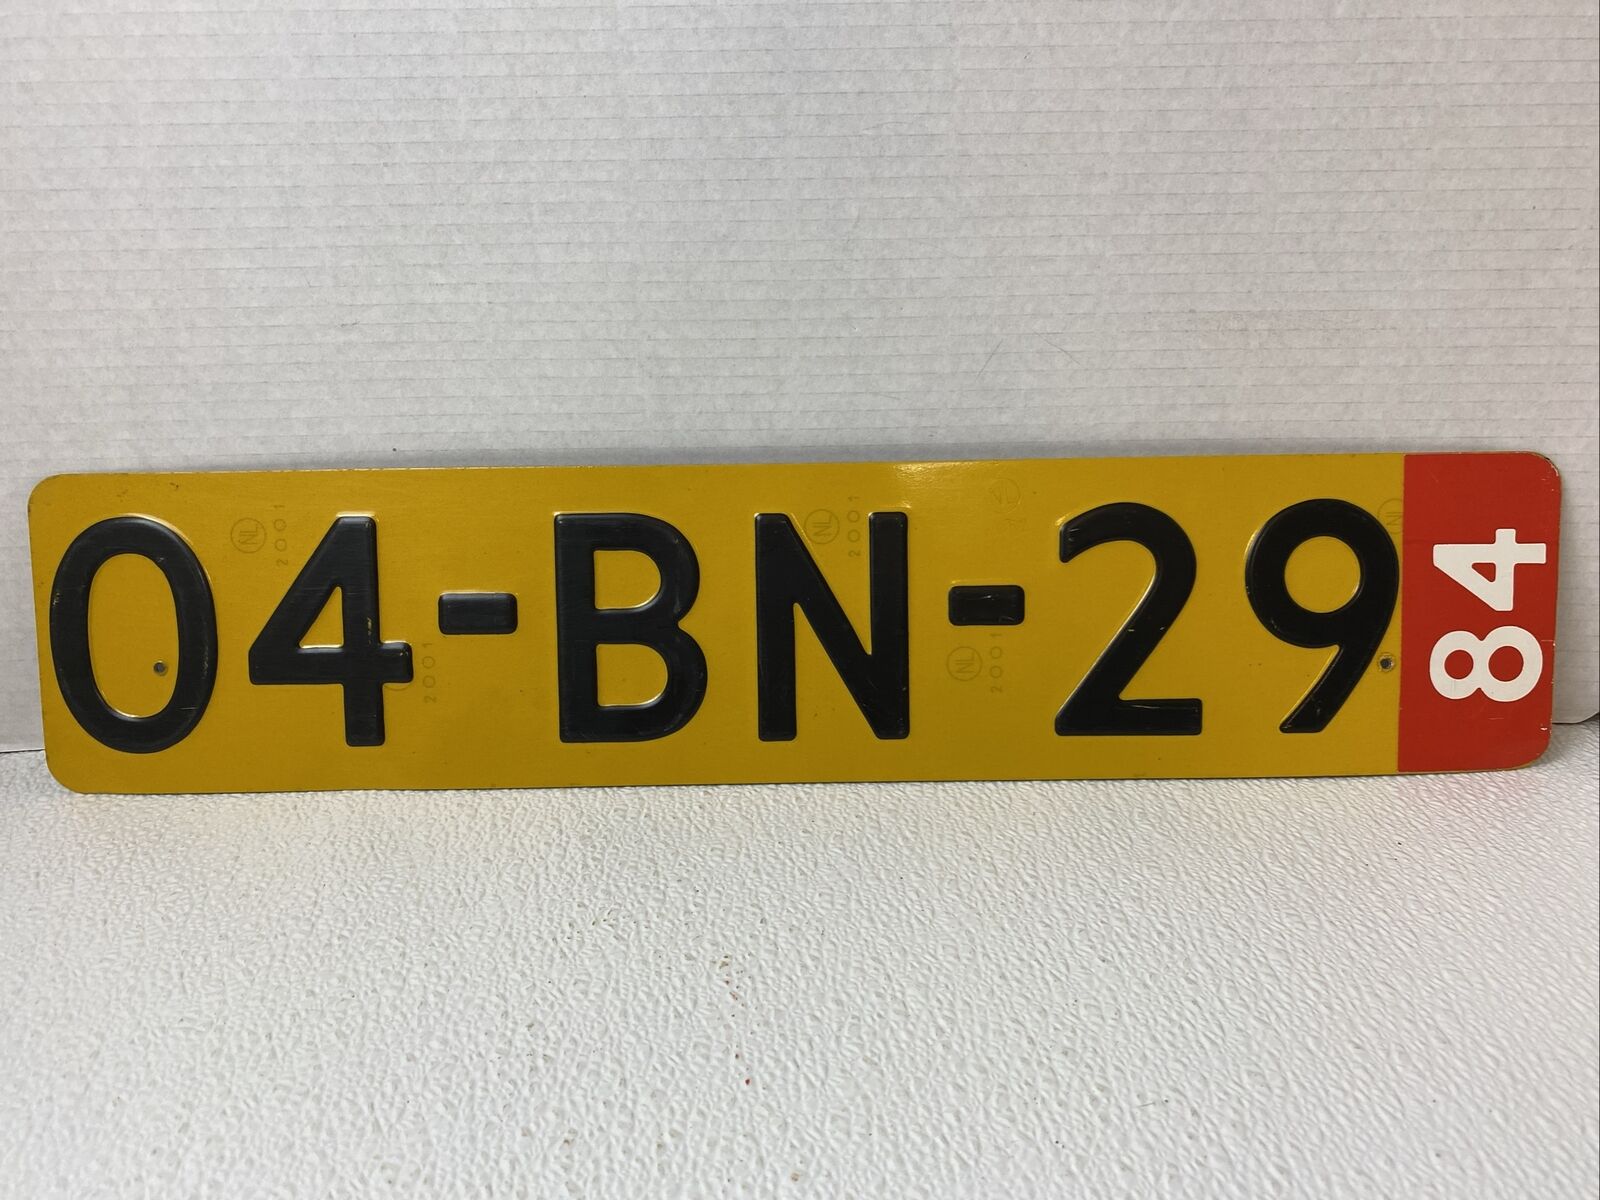 1984 Dutch Exempt License Plate License Plate 04-BN-29 Collectible No Tags